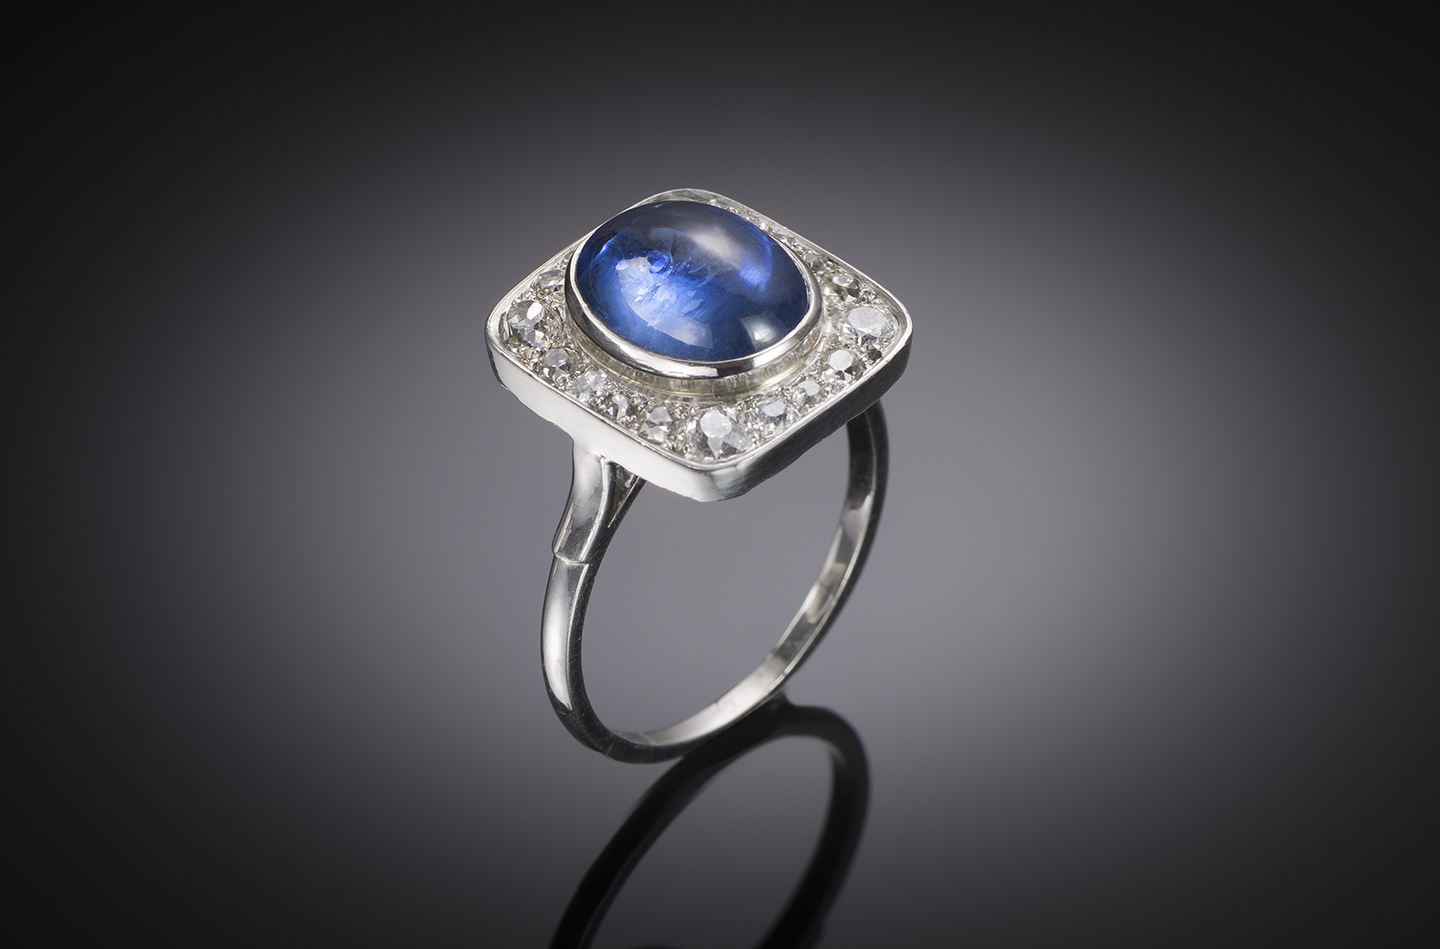 Cabochon sapphire (3.70 carats) and diamond ring in platinum-1